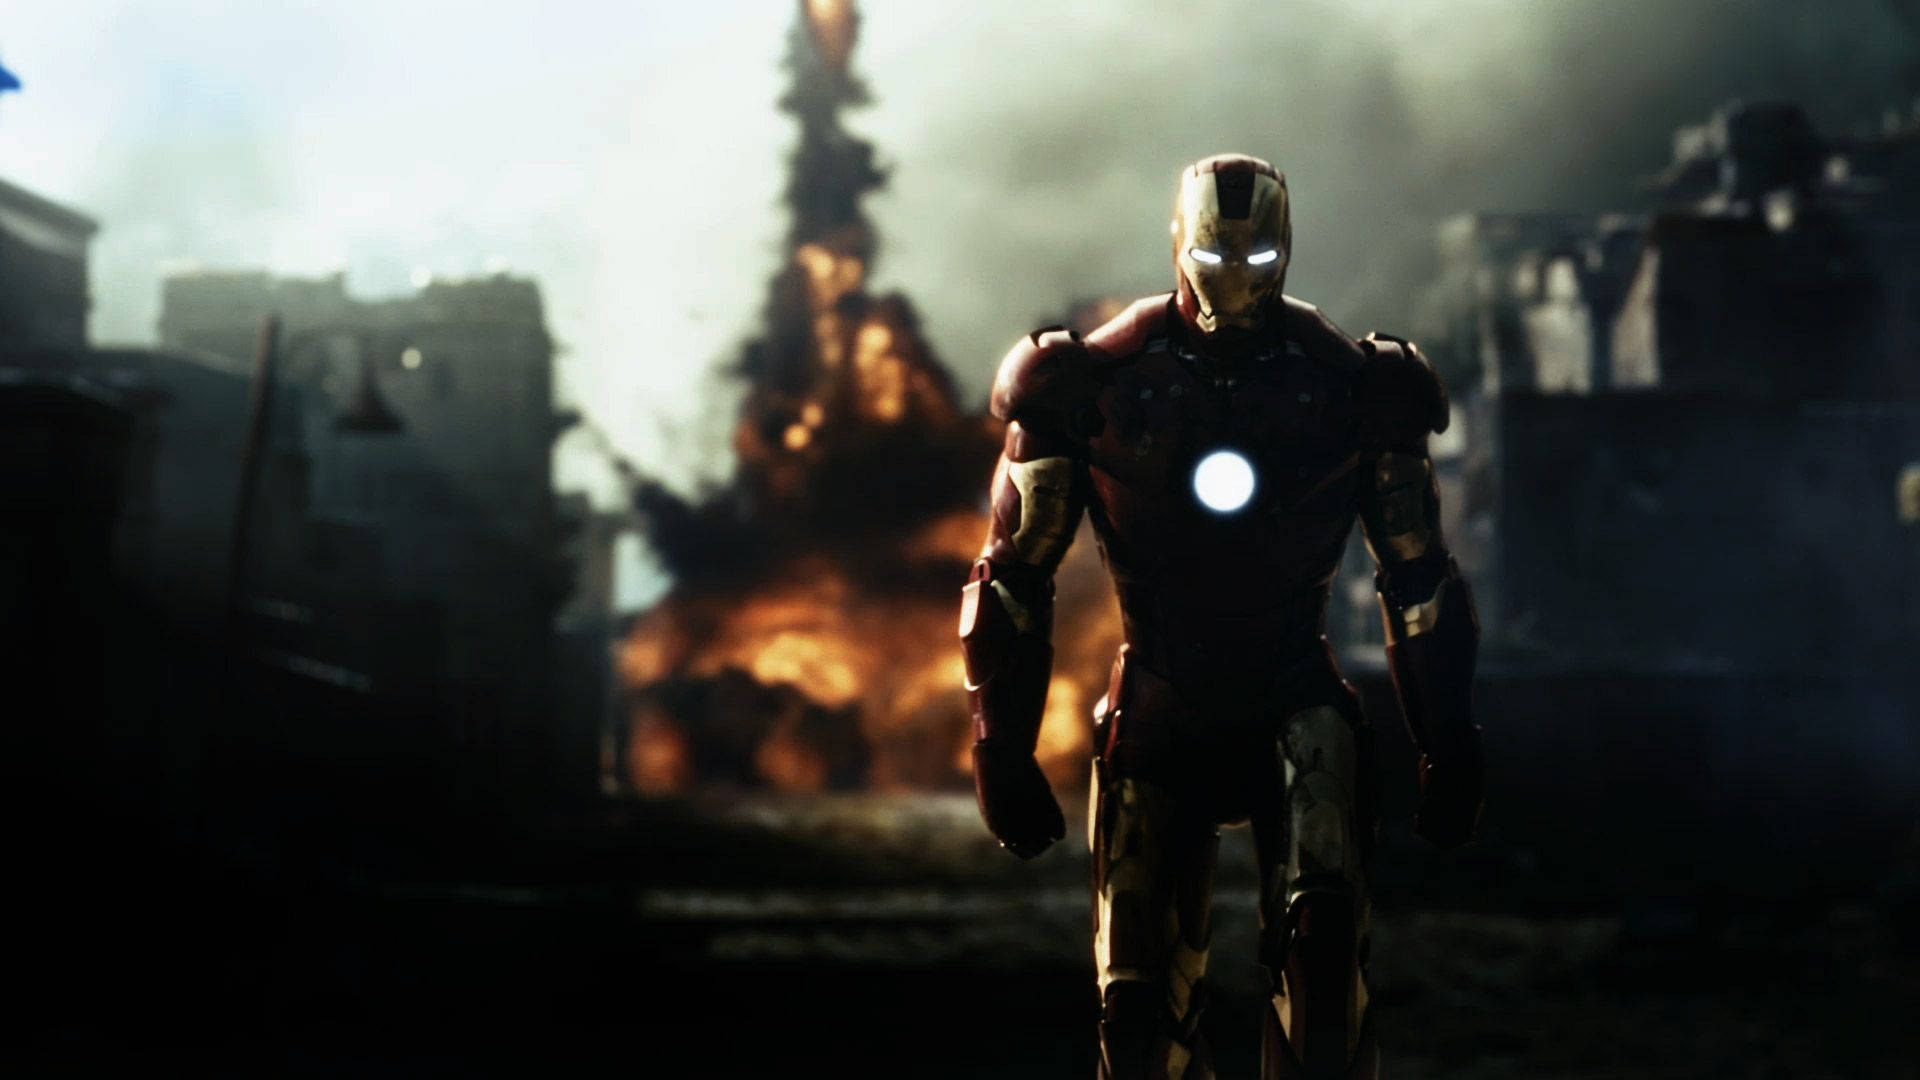 1080p Hd Iron Man Walking Away From Explosion Background